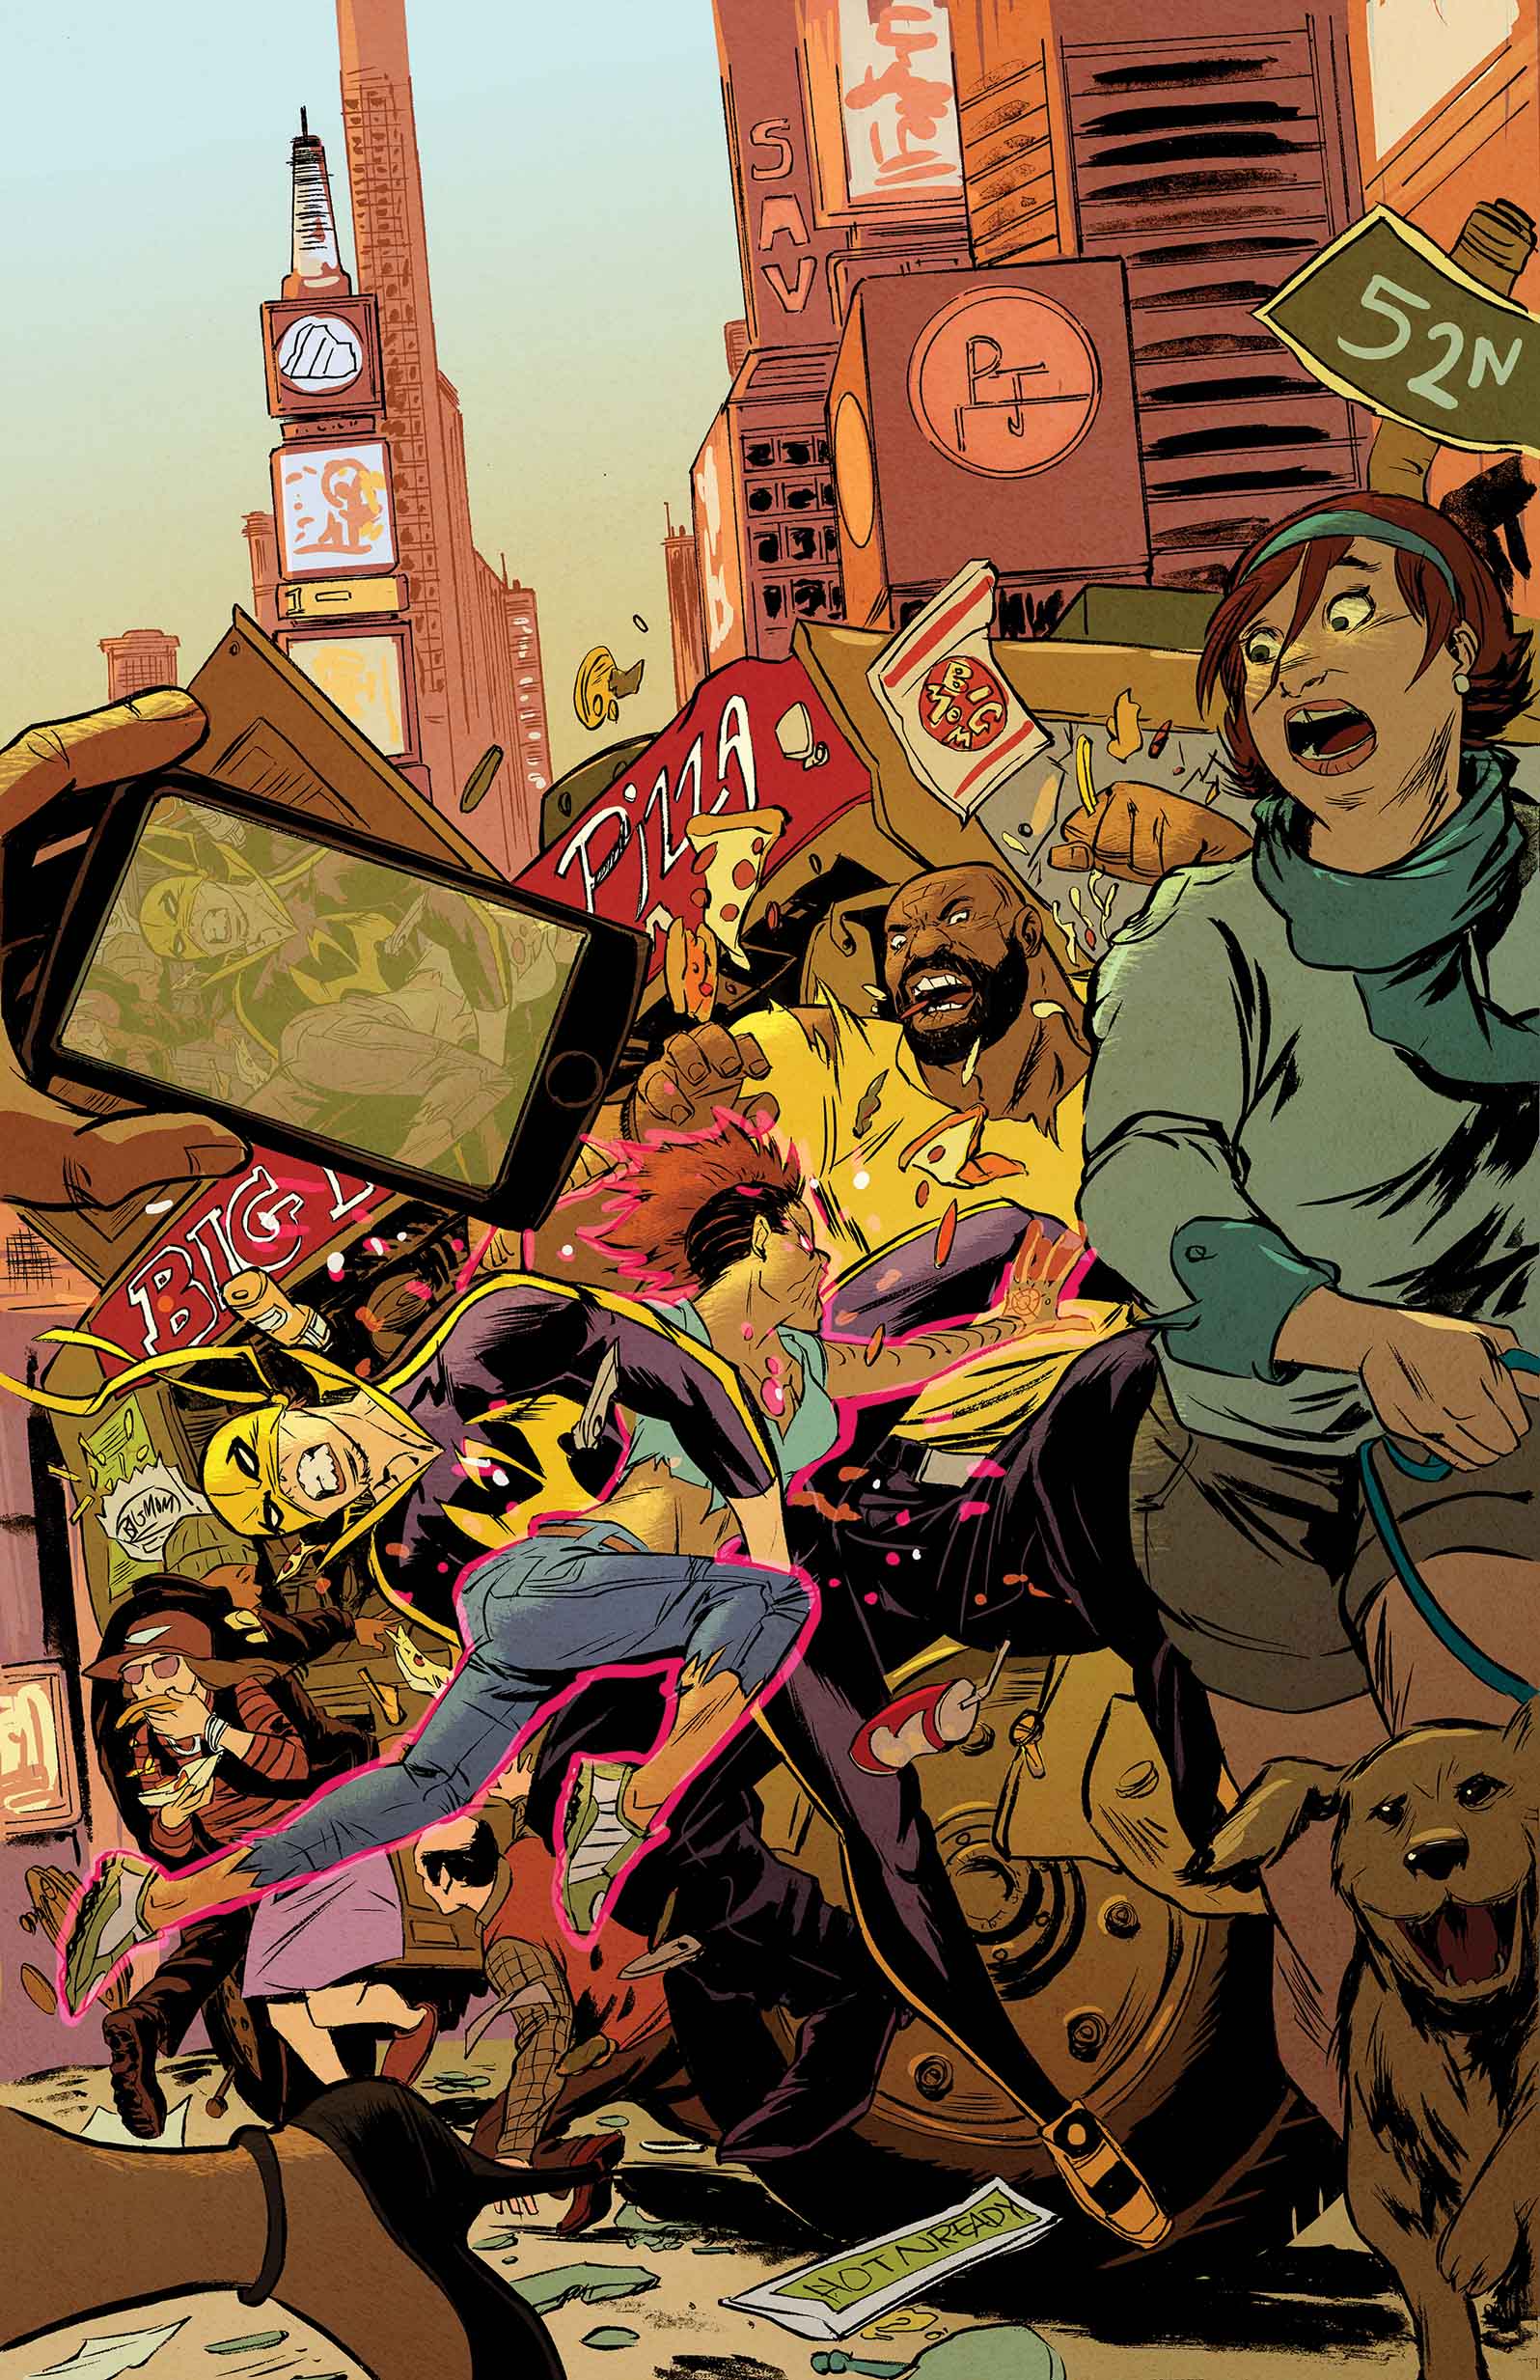 POWER MAN AND IRON FIST #4